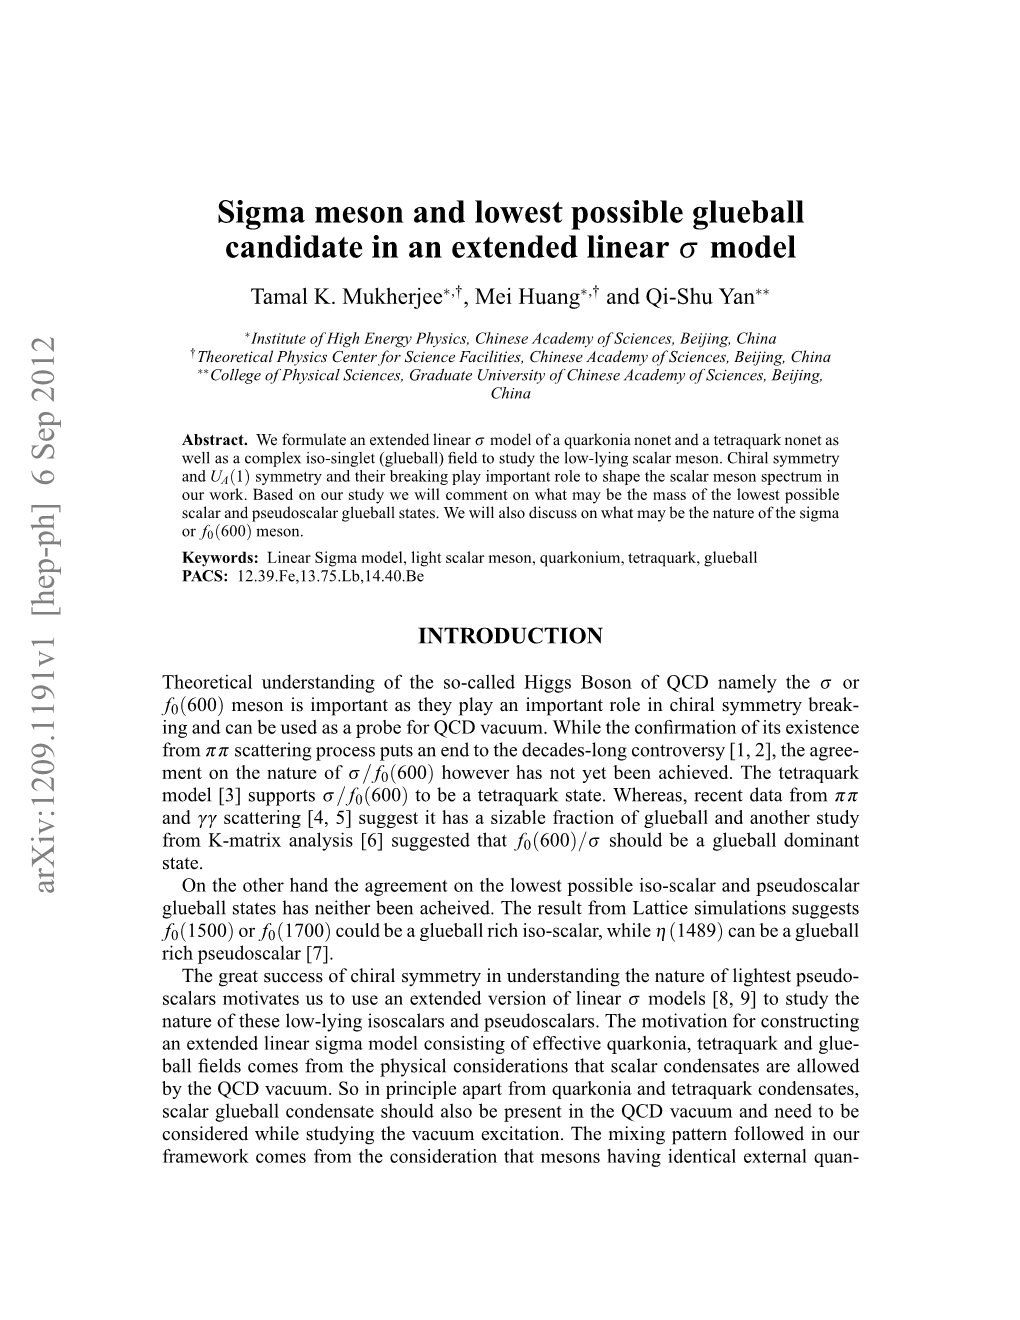 Sigma Meson and Lowest Possible Glueball Candidate in an Extended